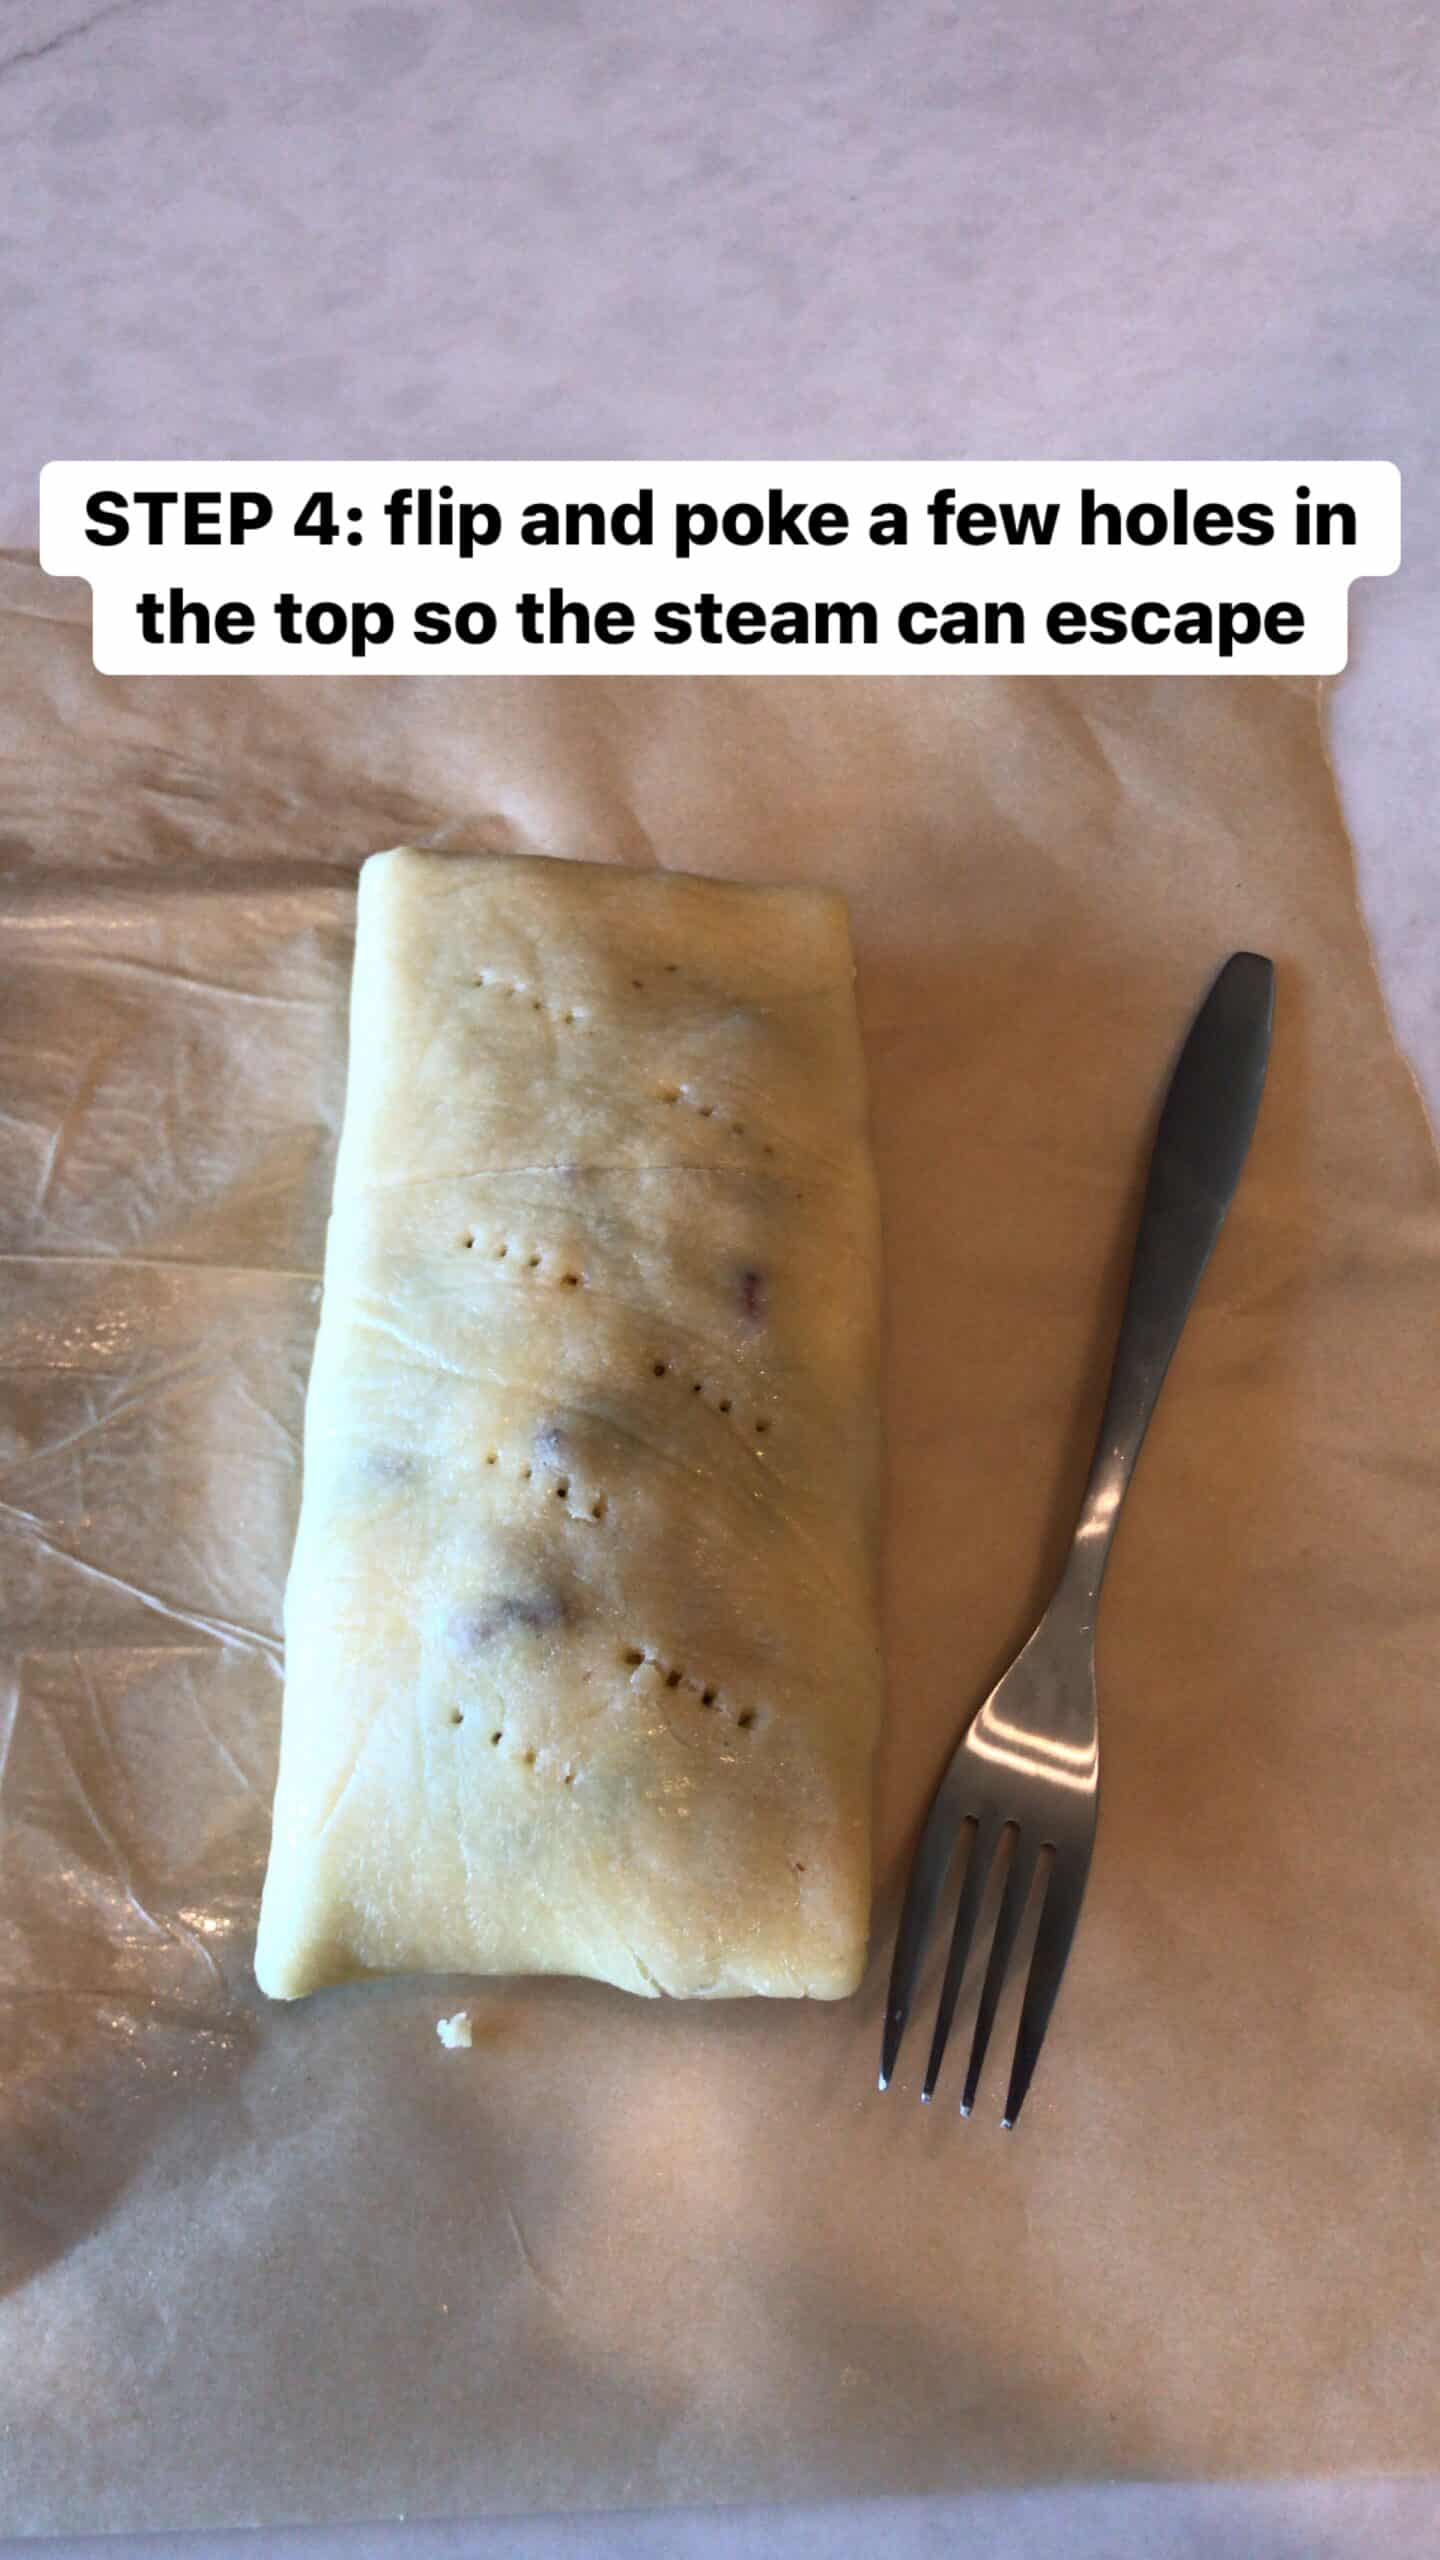 Hot pocket folding step 4: flip and poke holes in the top for steam to escape.